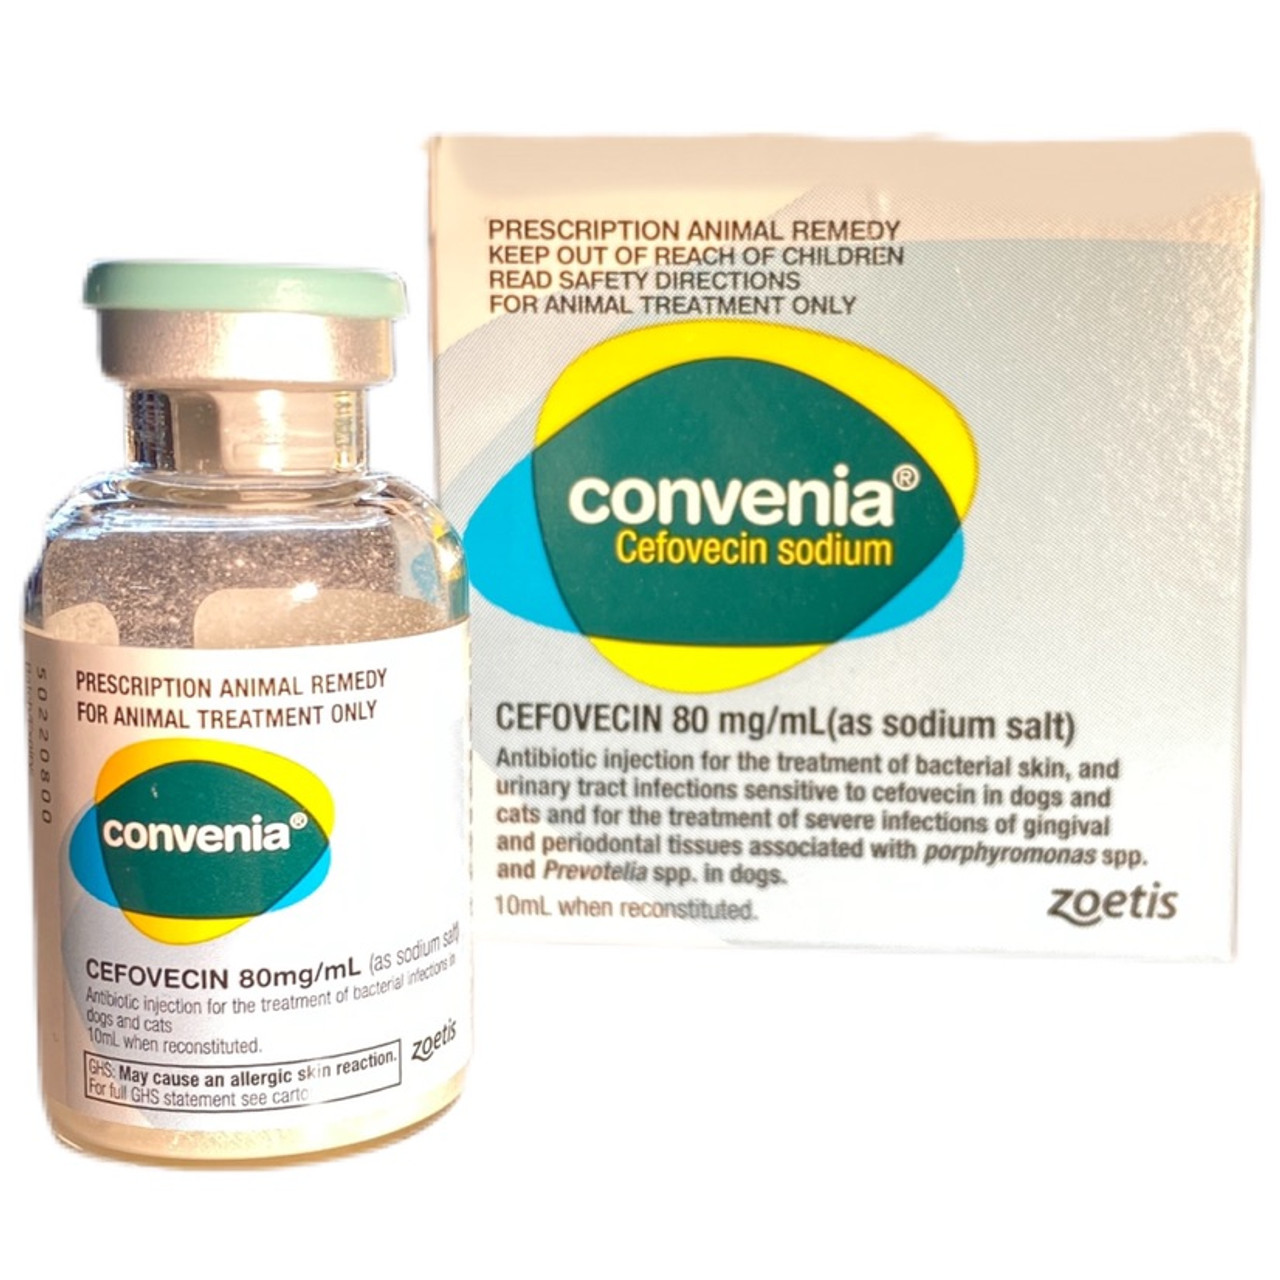 convenia-injection-for-cats-price-widely-cyberzine-picture-galleries